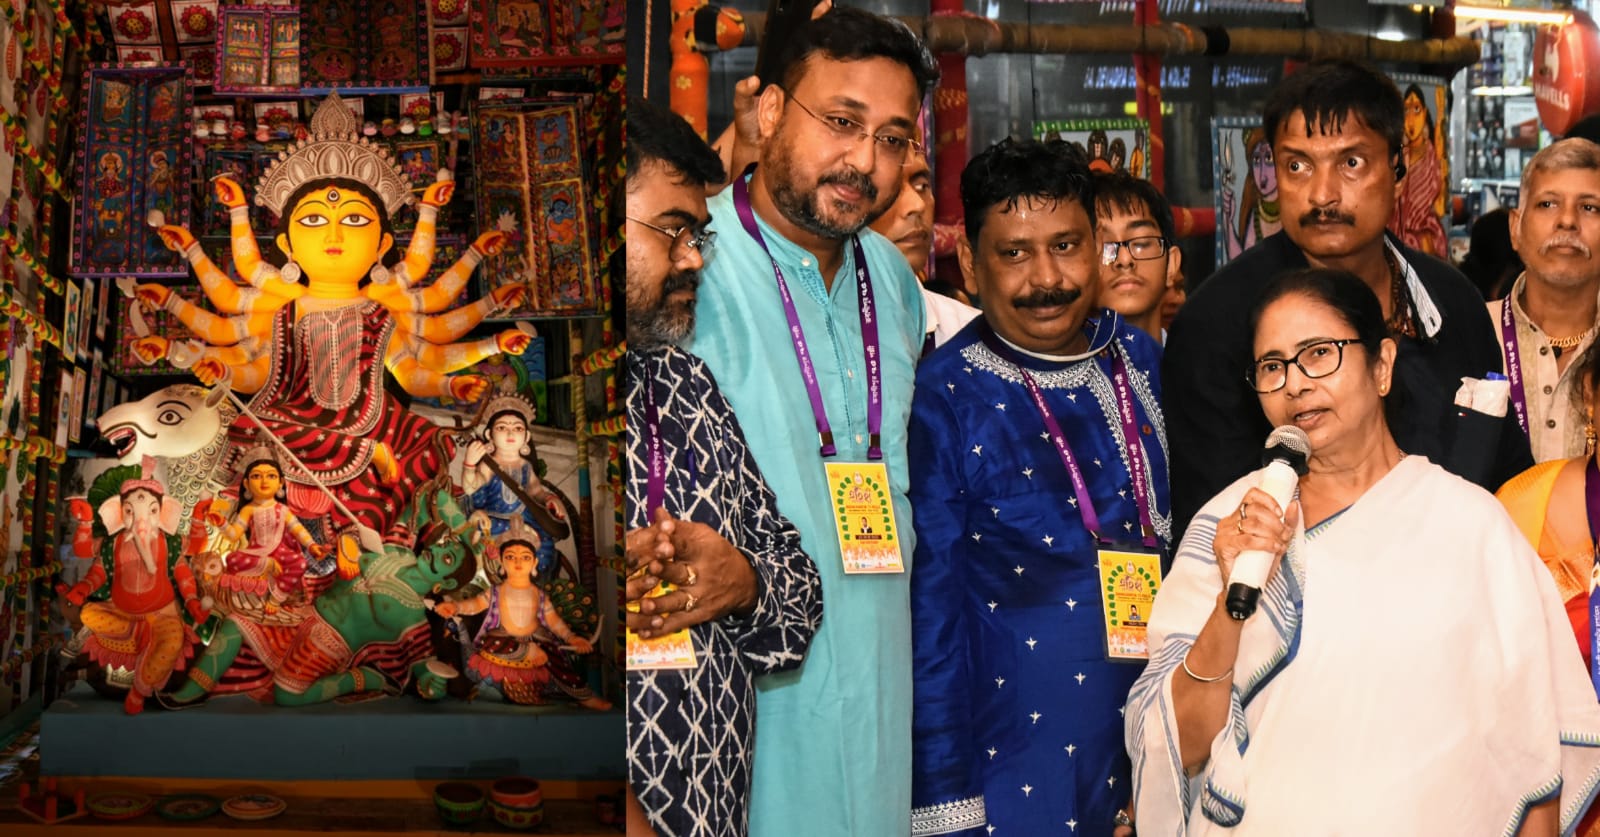 Mamata Banerjee inaugurates​ Bhowanipur 75 Palli with its theme ‘Aitijhya Beche Thakuk’ –​ ‘Let the Heritage Live’ to uplift the morale of the rich culture of West Bengal for Durga Puja